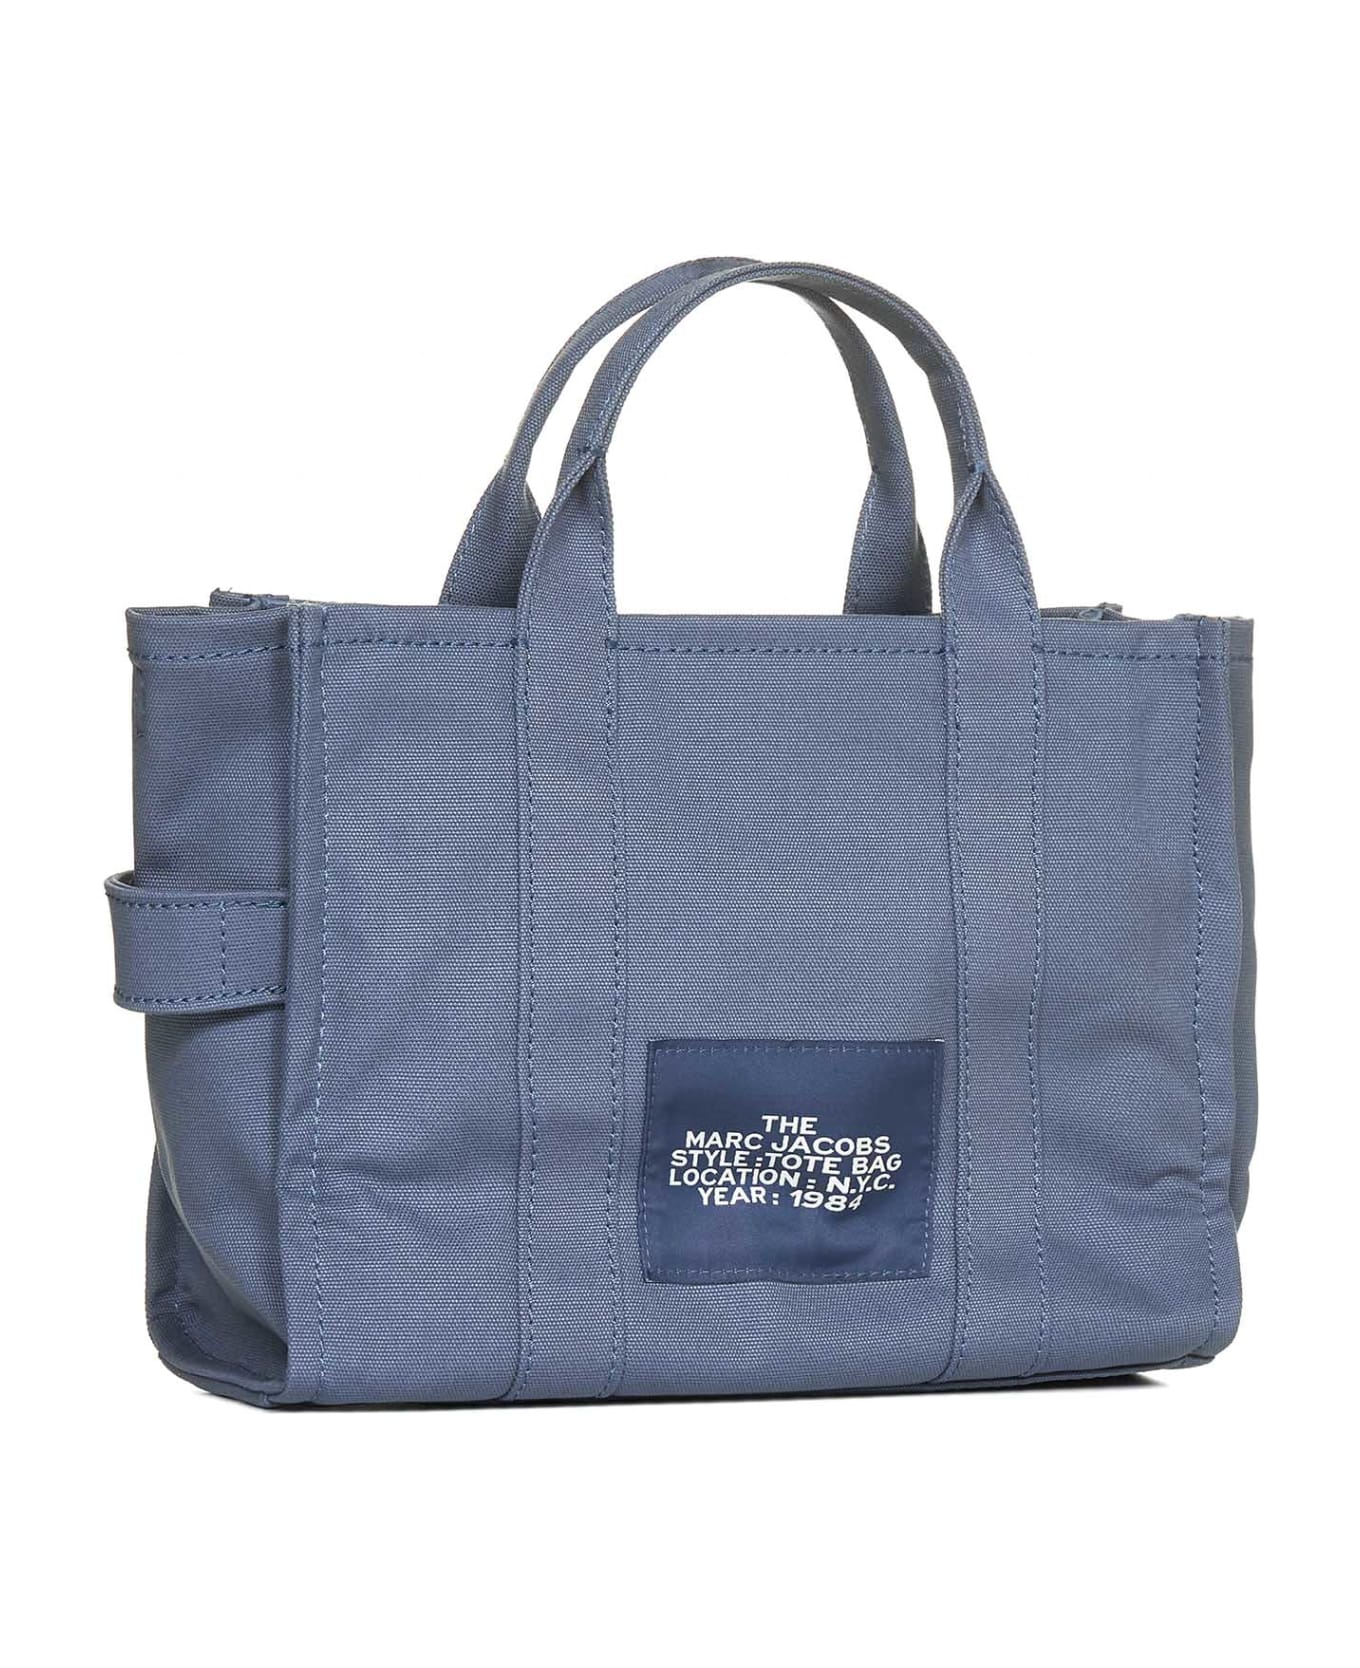 Marc Jacobs The Medium Tote Bag - Blue トートバッグ